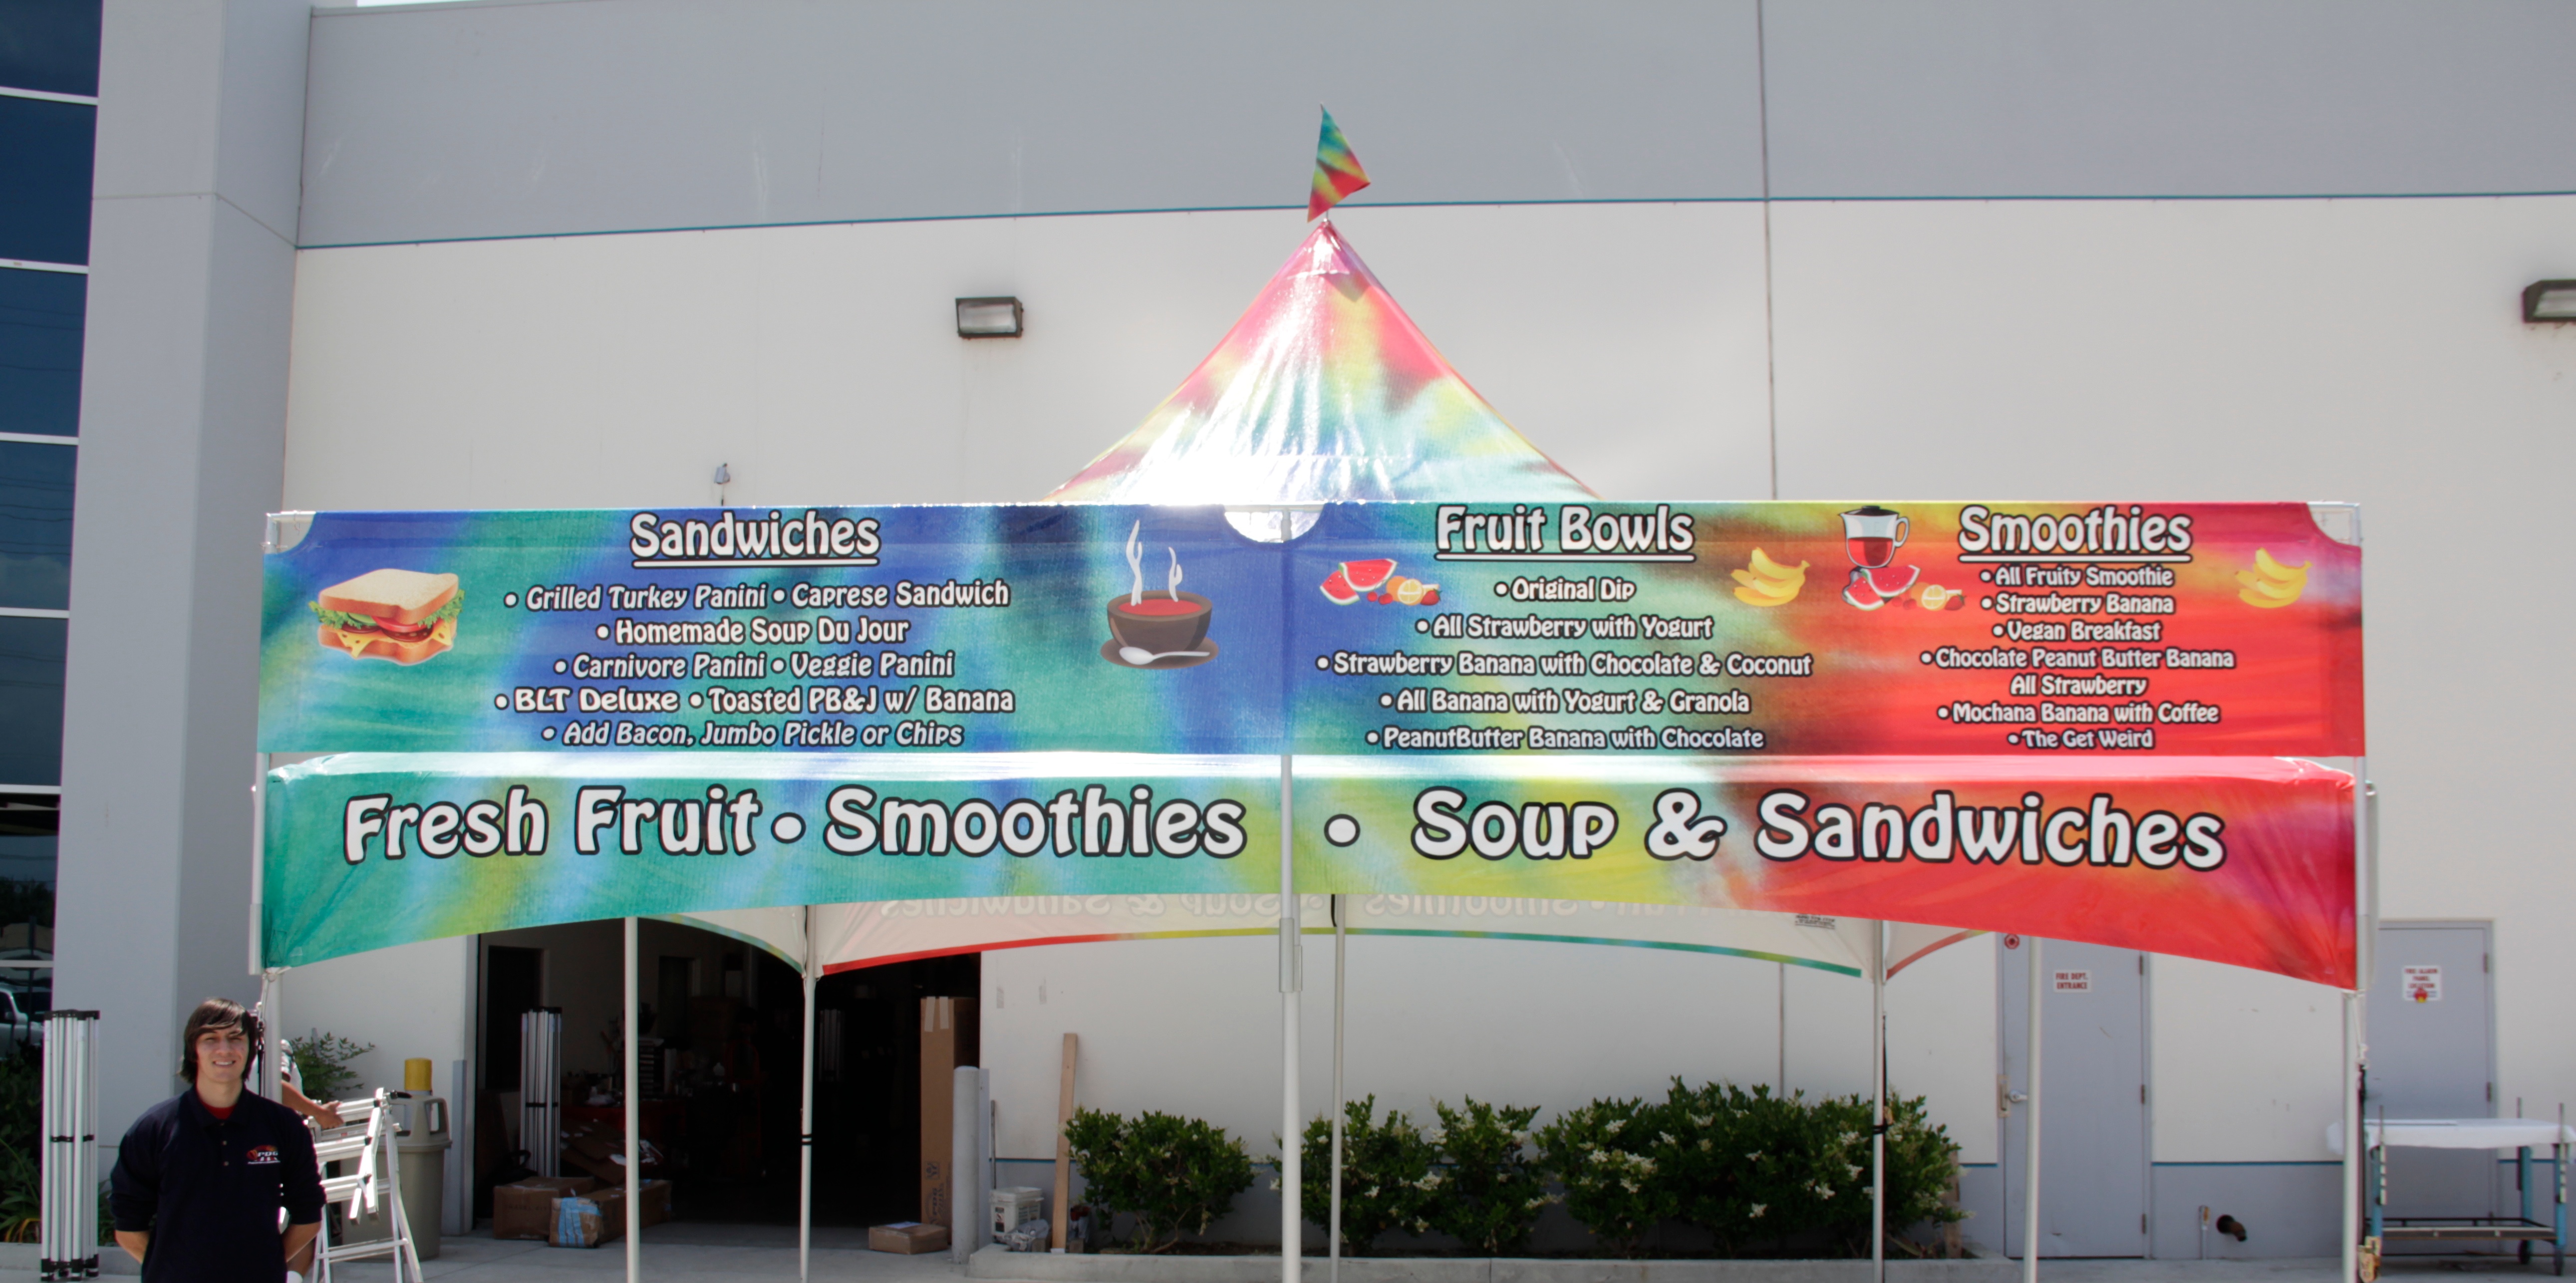 20 foot tent banner used as a menu on top of a high peak tent